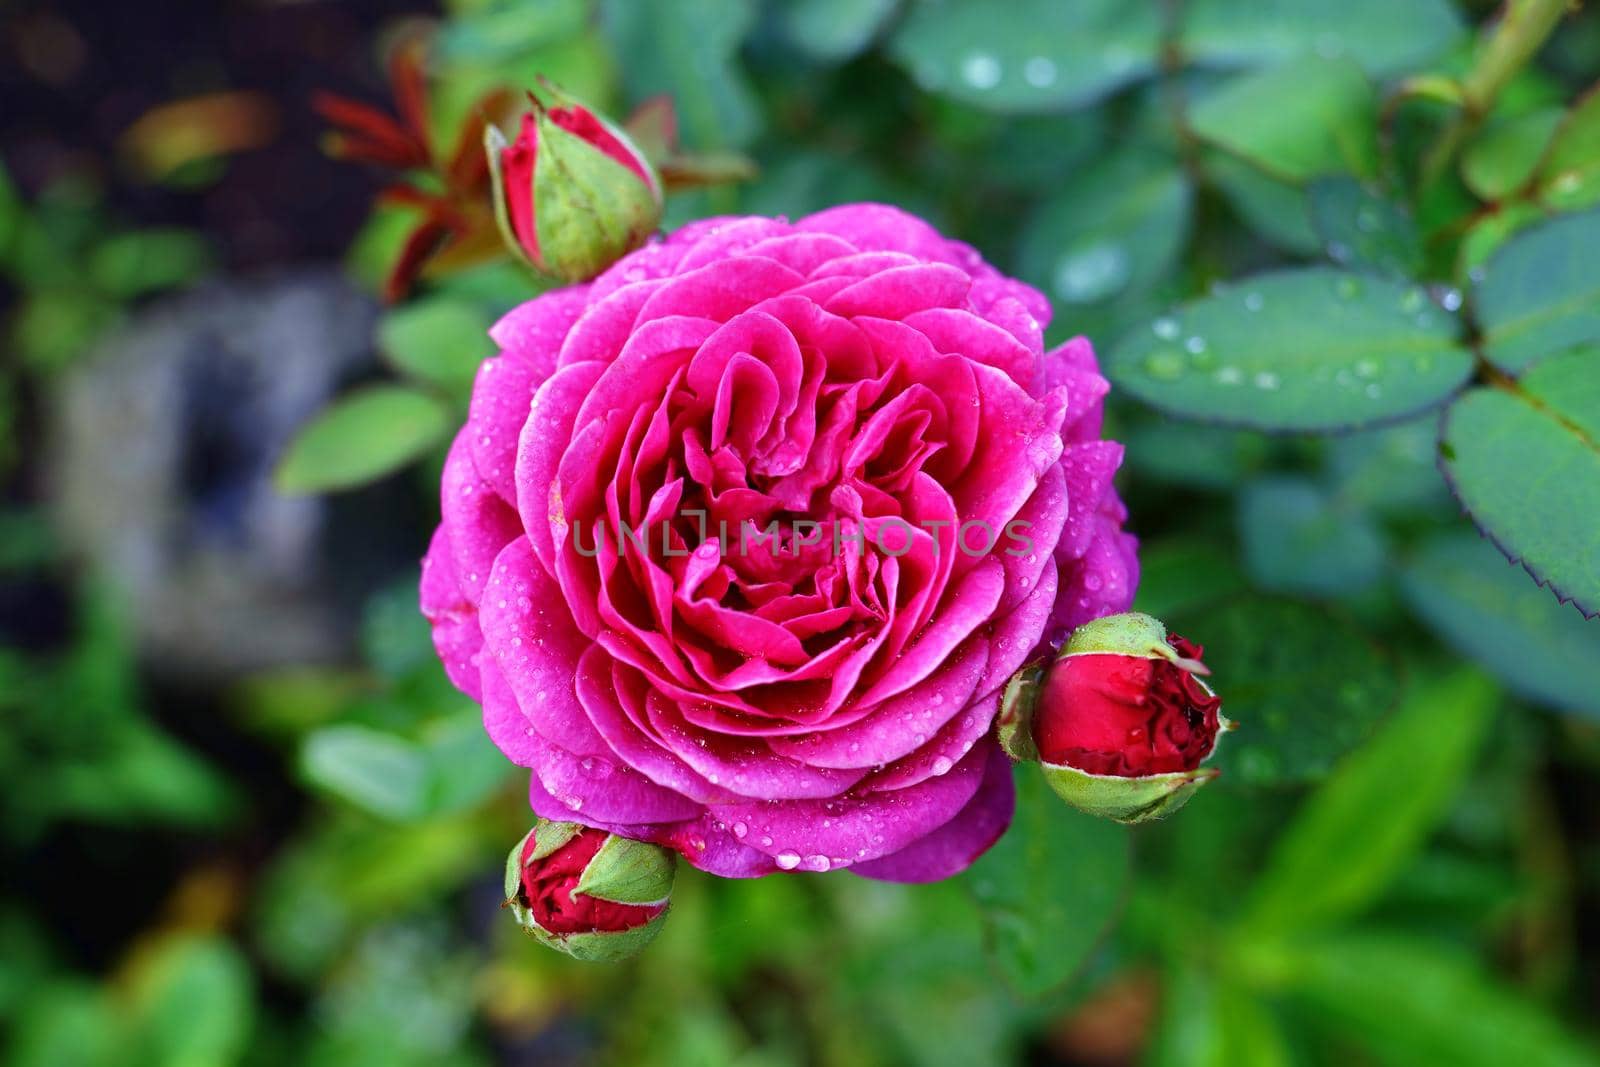 Pink rose with bud in natural green environment outdoors. by clusterx